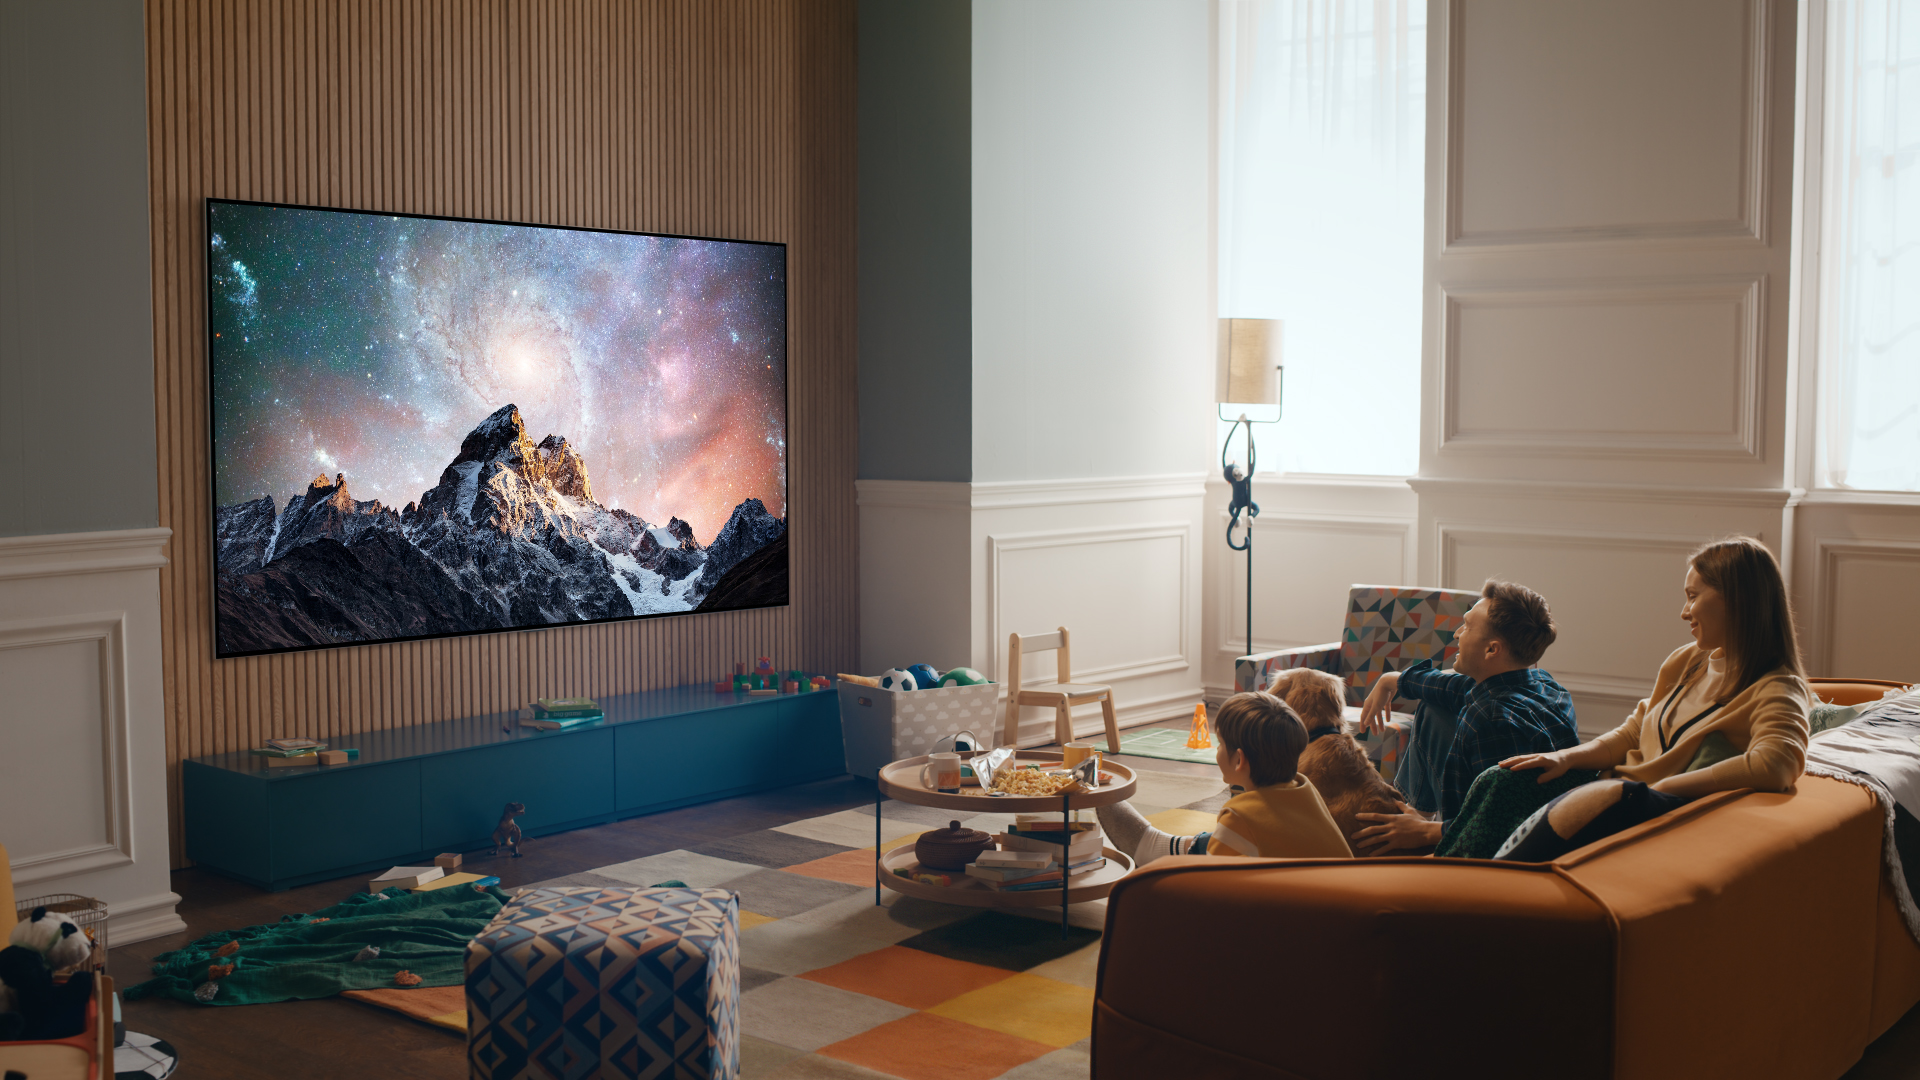 The LG G2 Gallery Series TV hanging on the wall displaying a mountain scene